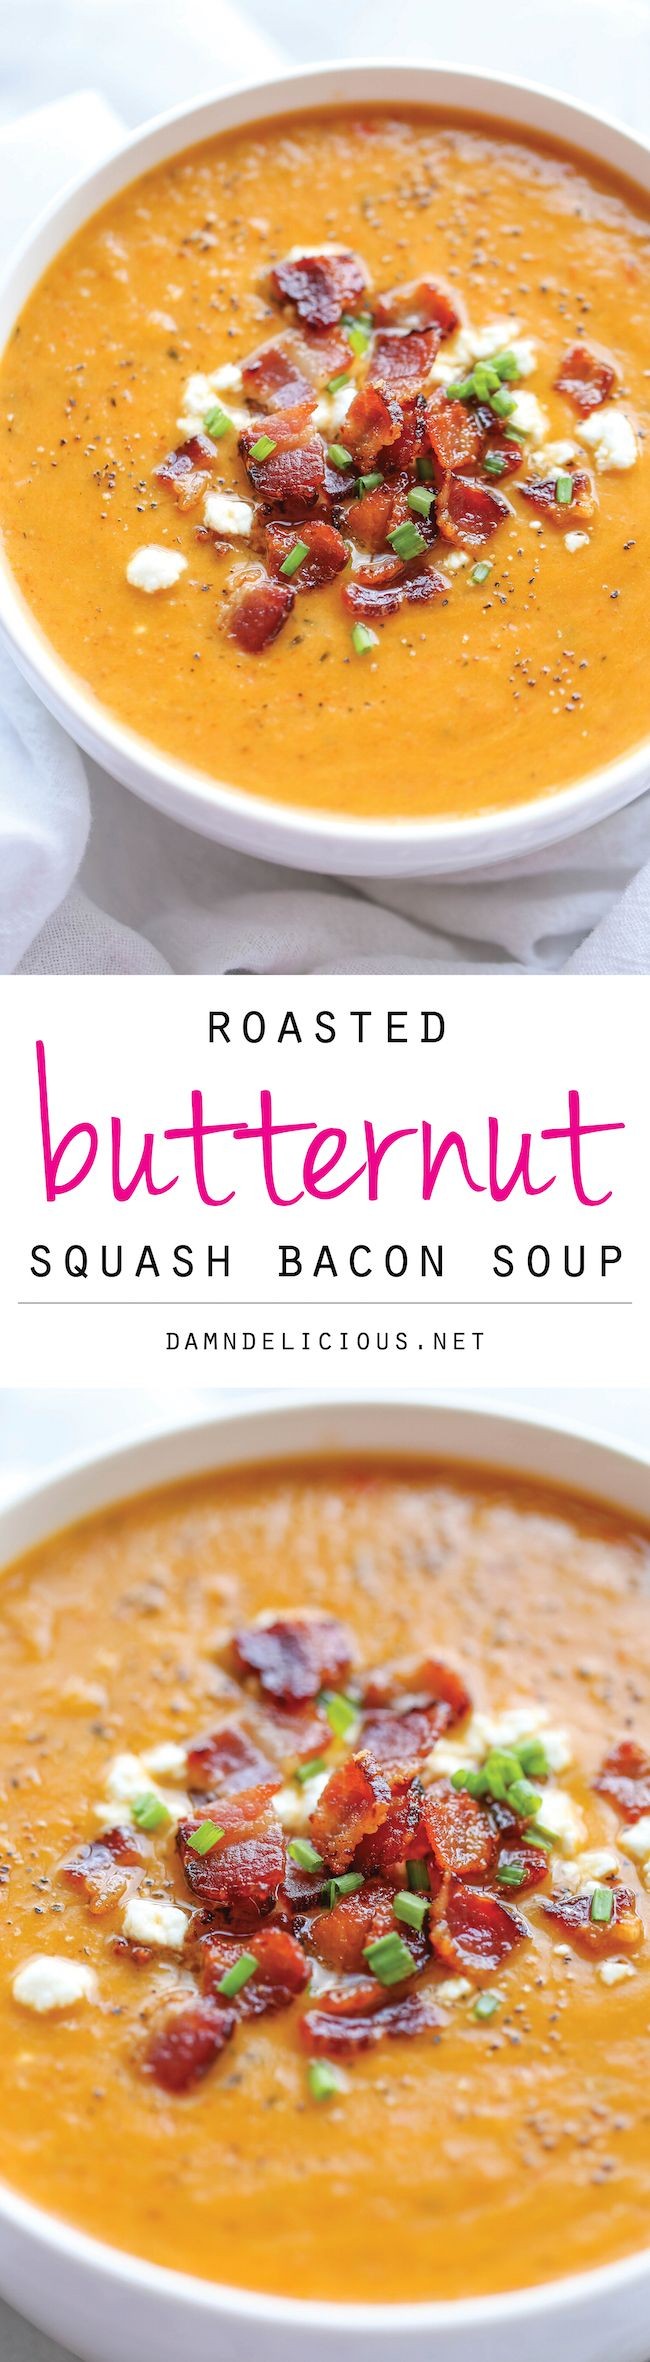 Roasted Butternut Squash and Bacon Soup - By far t...